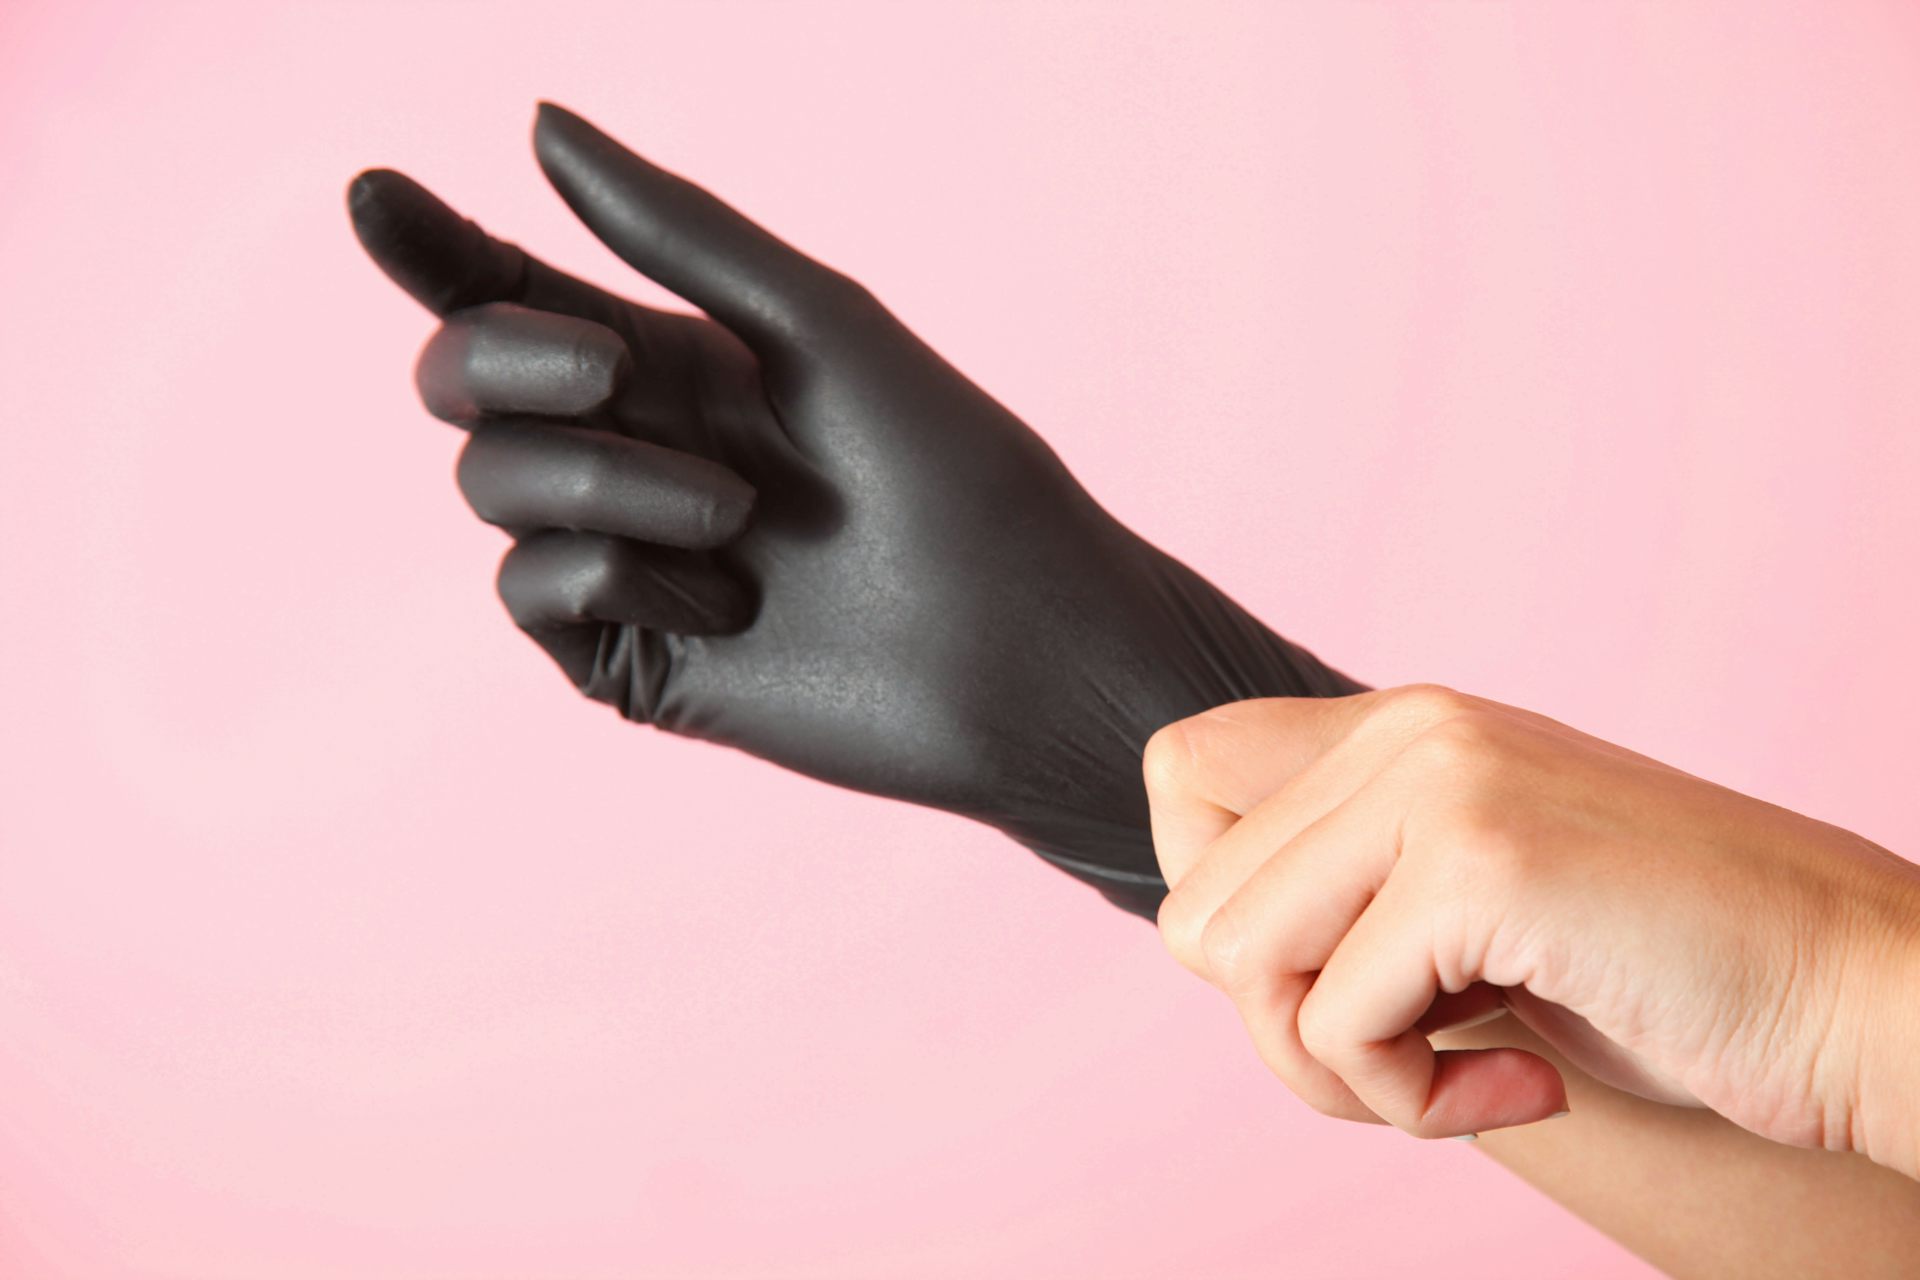 Yes, latex gloves can be part of a healthy relationship busting the myths around sexual fetishism image